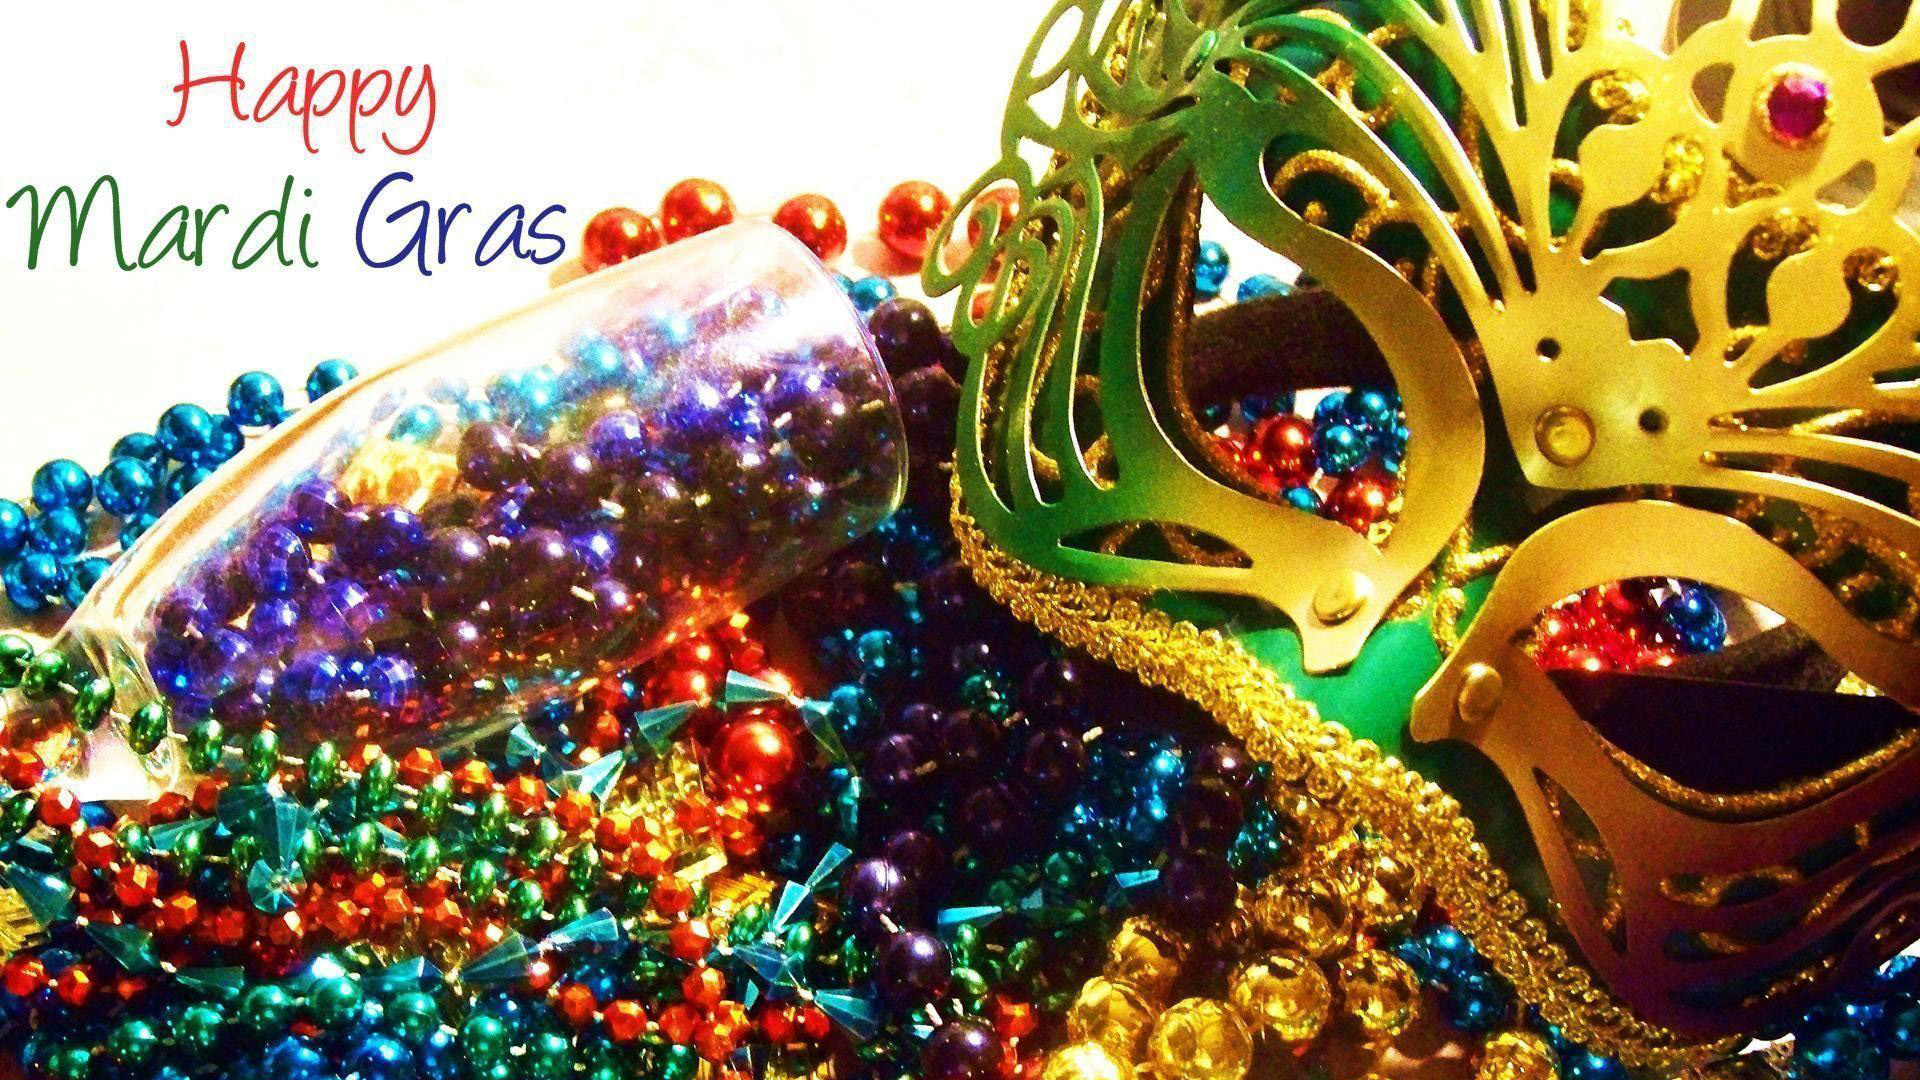 Golden Face Mask With Colorful Decoration Beads 2K Mardi Gras